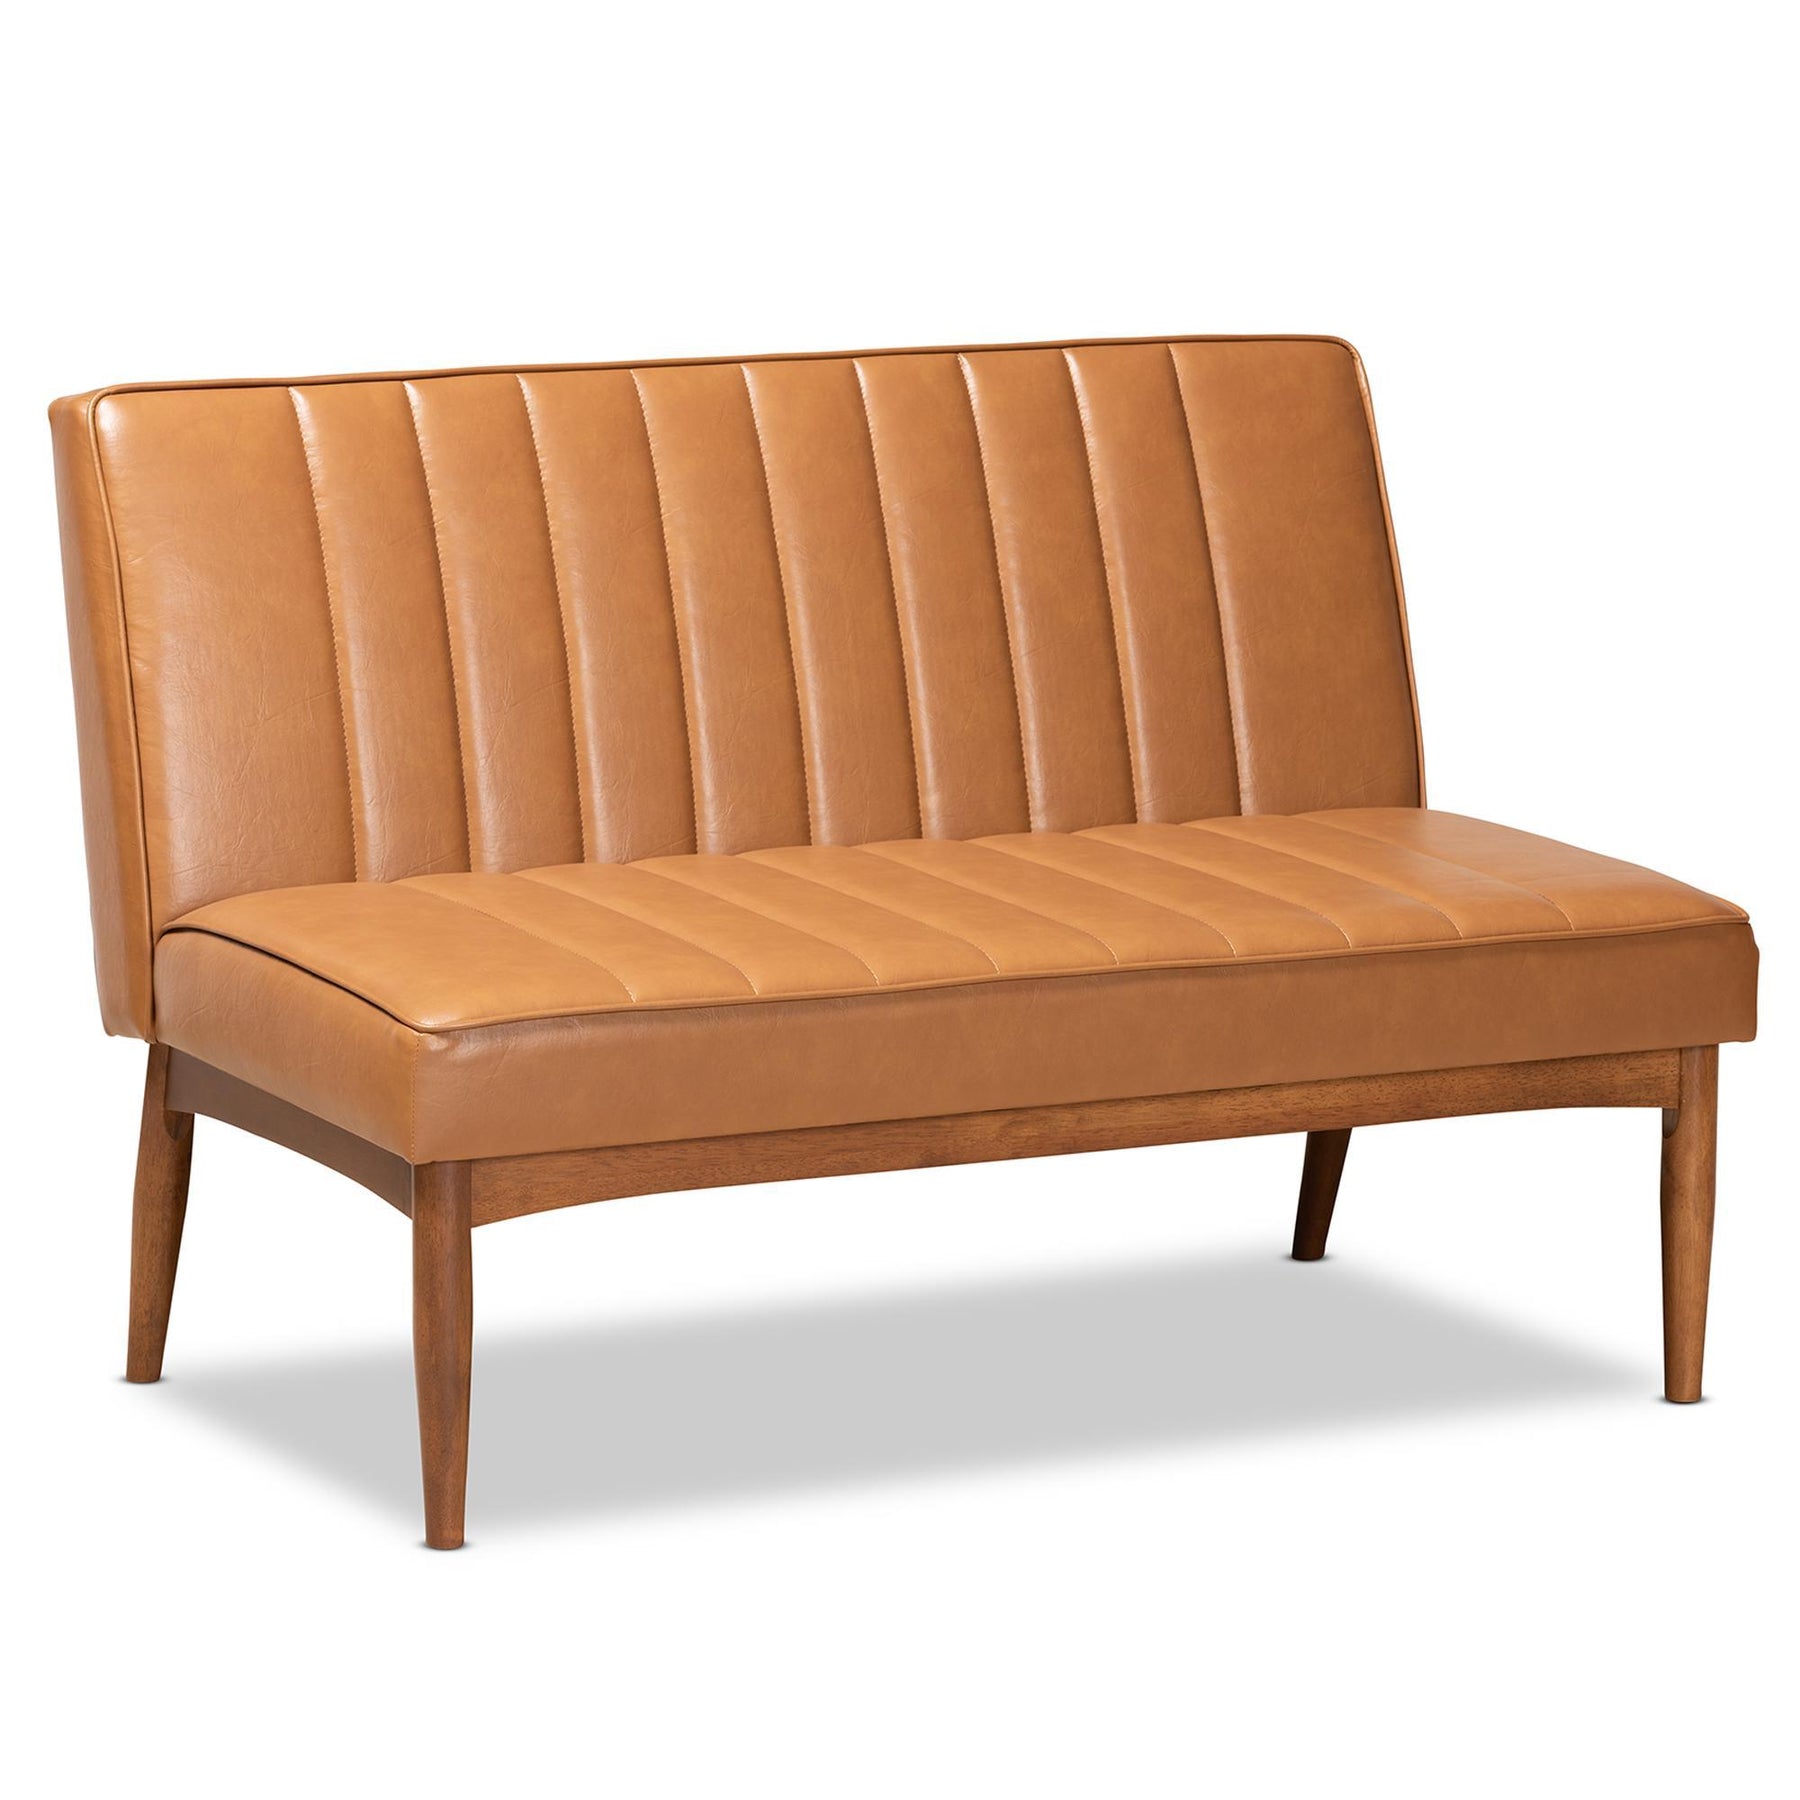 Baxton Studio Daymond Mid-Century Modern Tan Faux Leather Upholstered And Walnut Brown Finished Wood 2-Piece Dining Nook Banquette Set - BBT8051.12-Tan/Walnut-2PC SF Bench